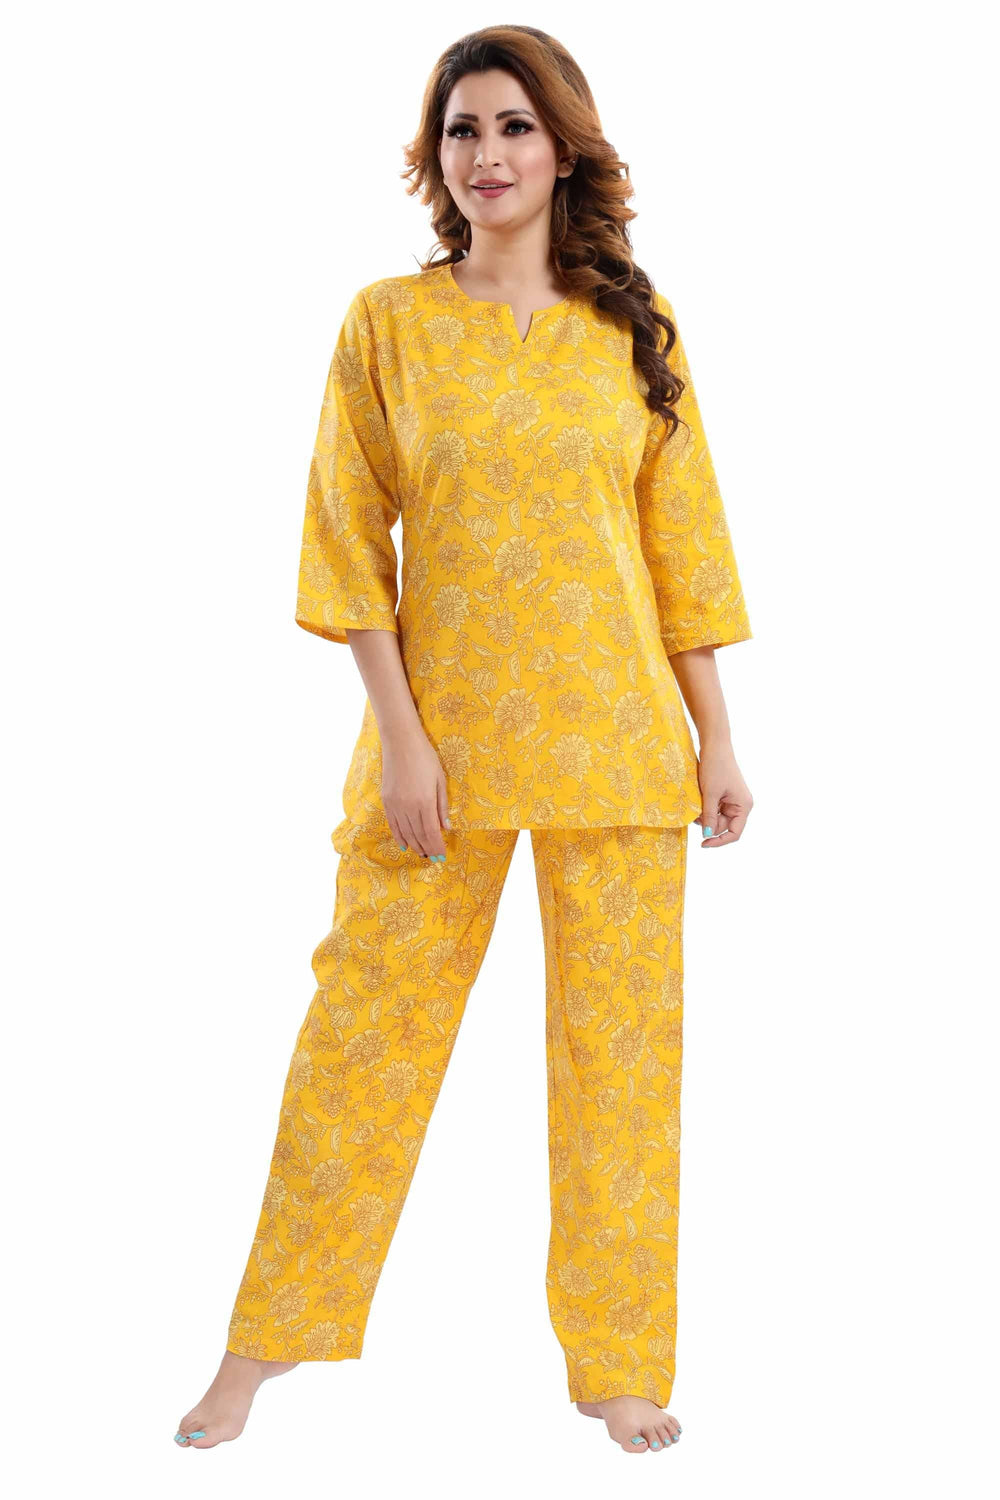  Co-ord sets  Shop Latest Yellow co ords sets online india - 9 Shineslabel- 9shines label 